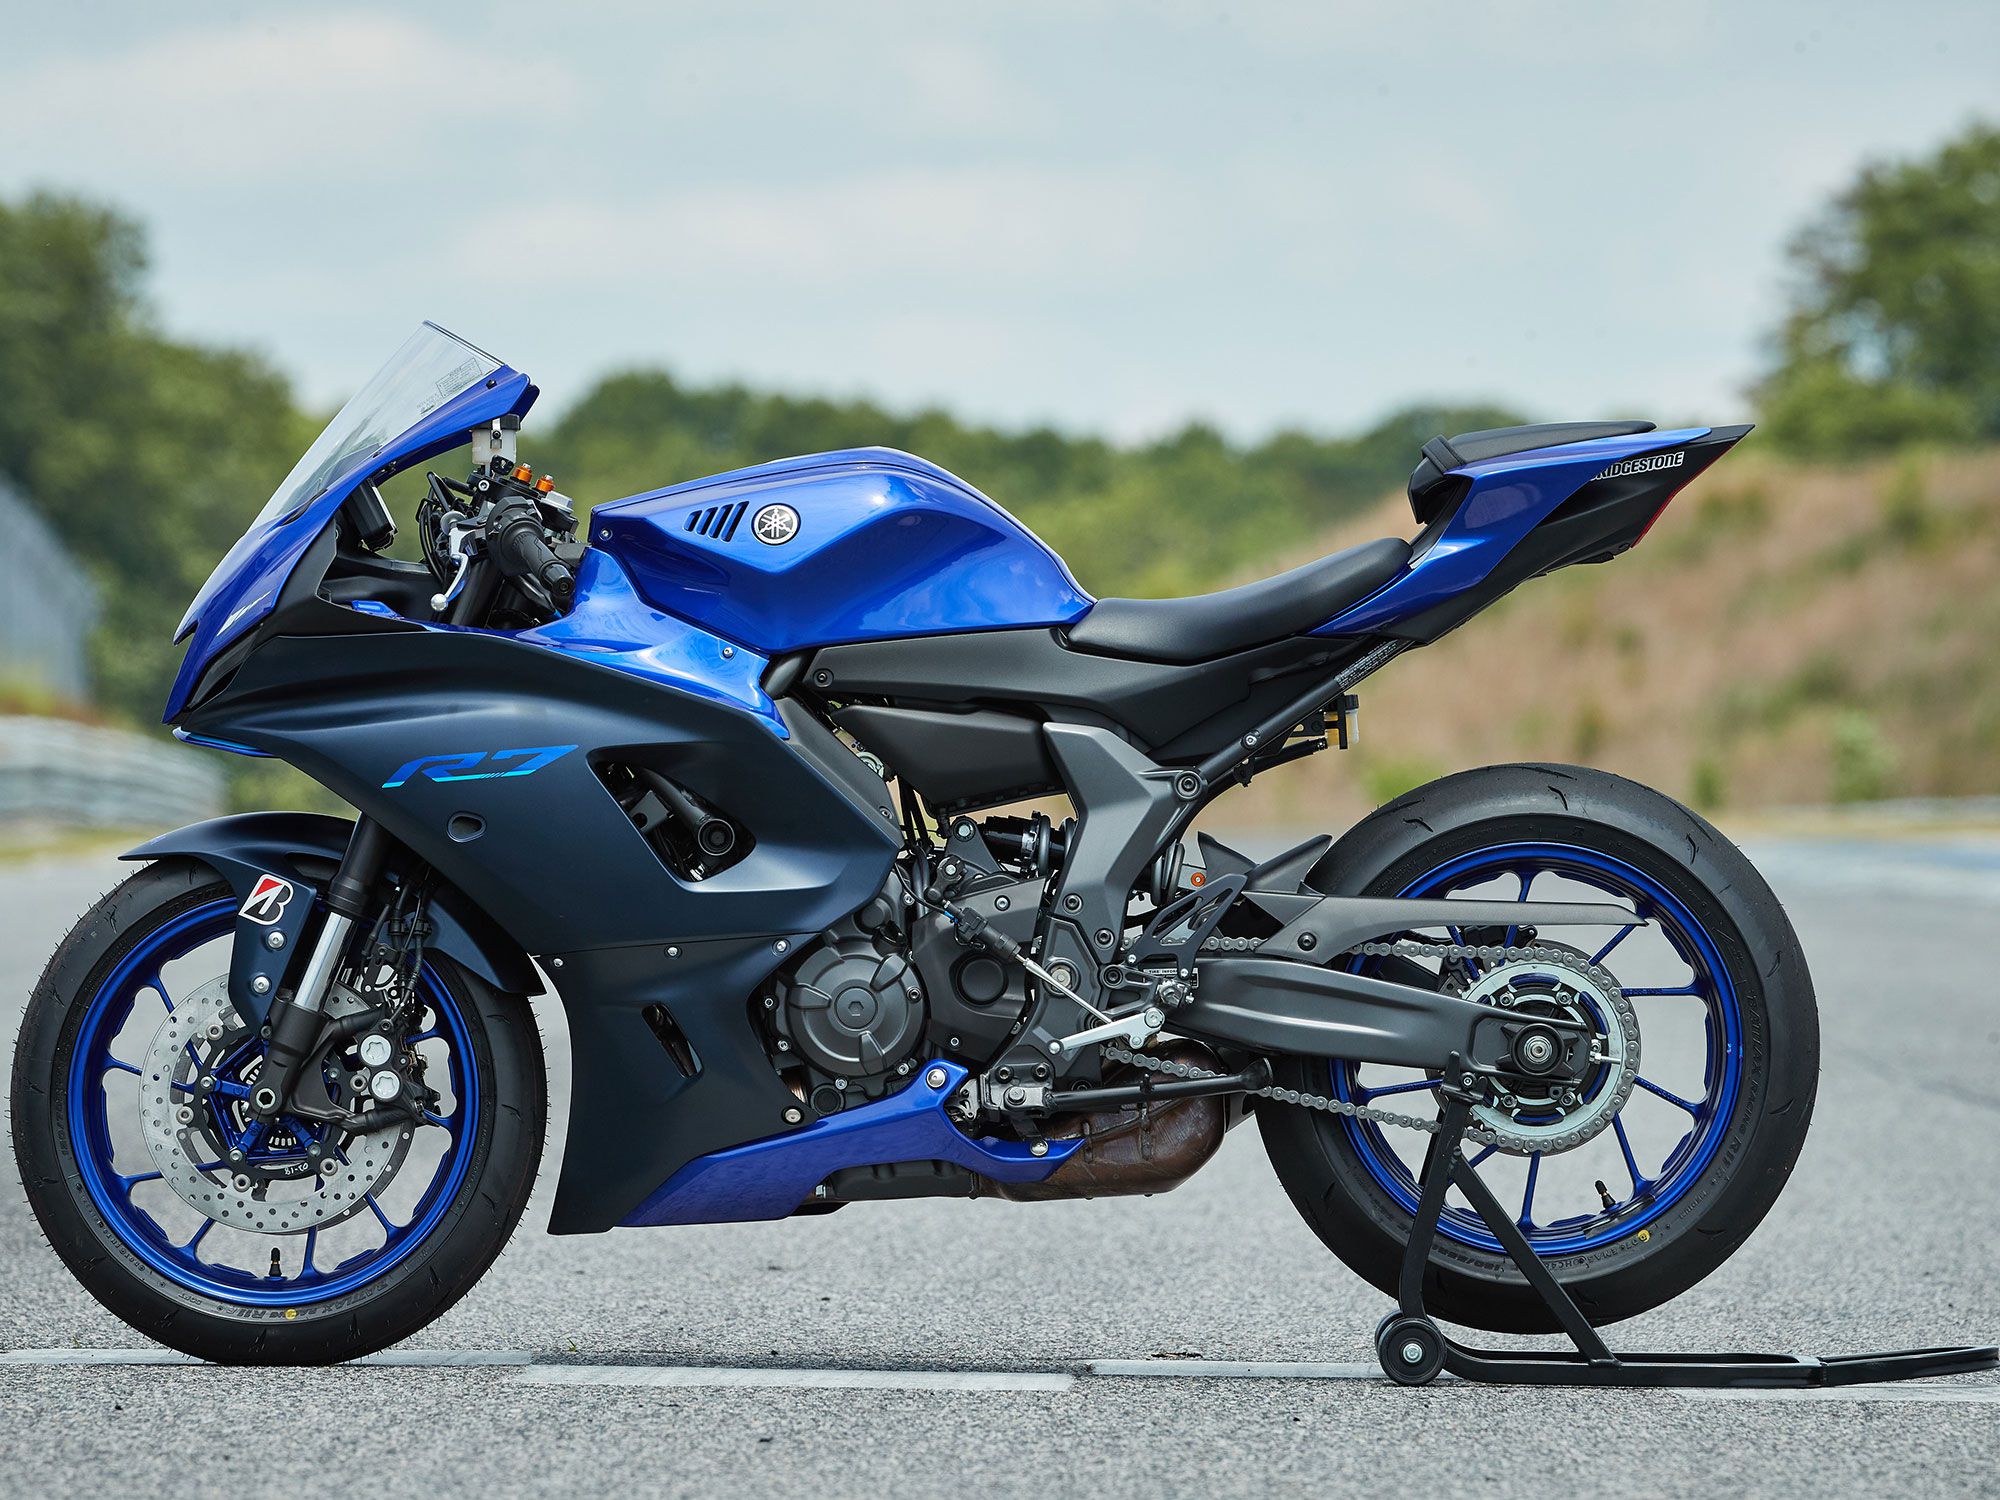 Yamaha offers value in the sportbike class with its sharp looking and affordable YZF-R7 ($8,999).